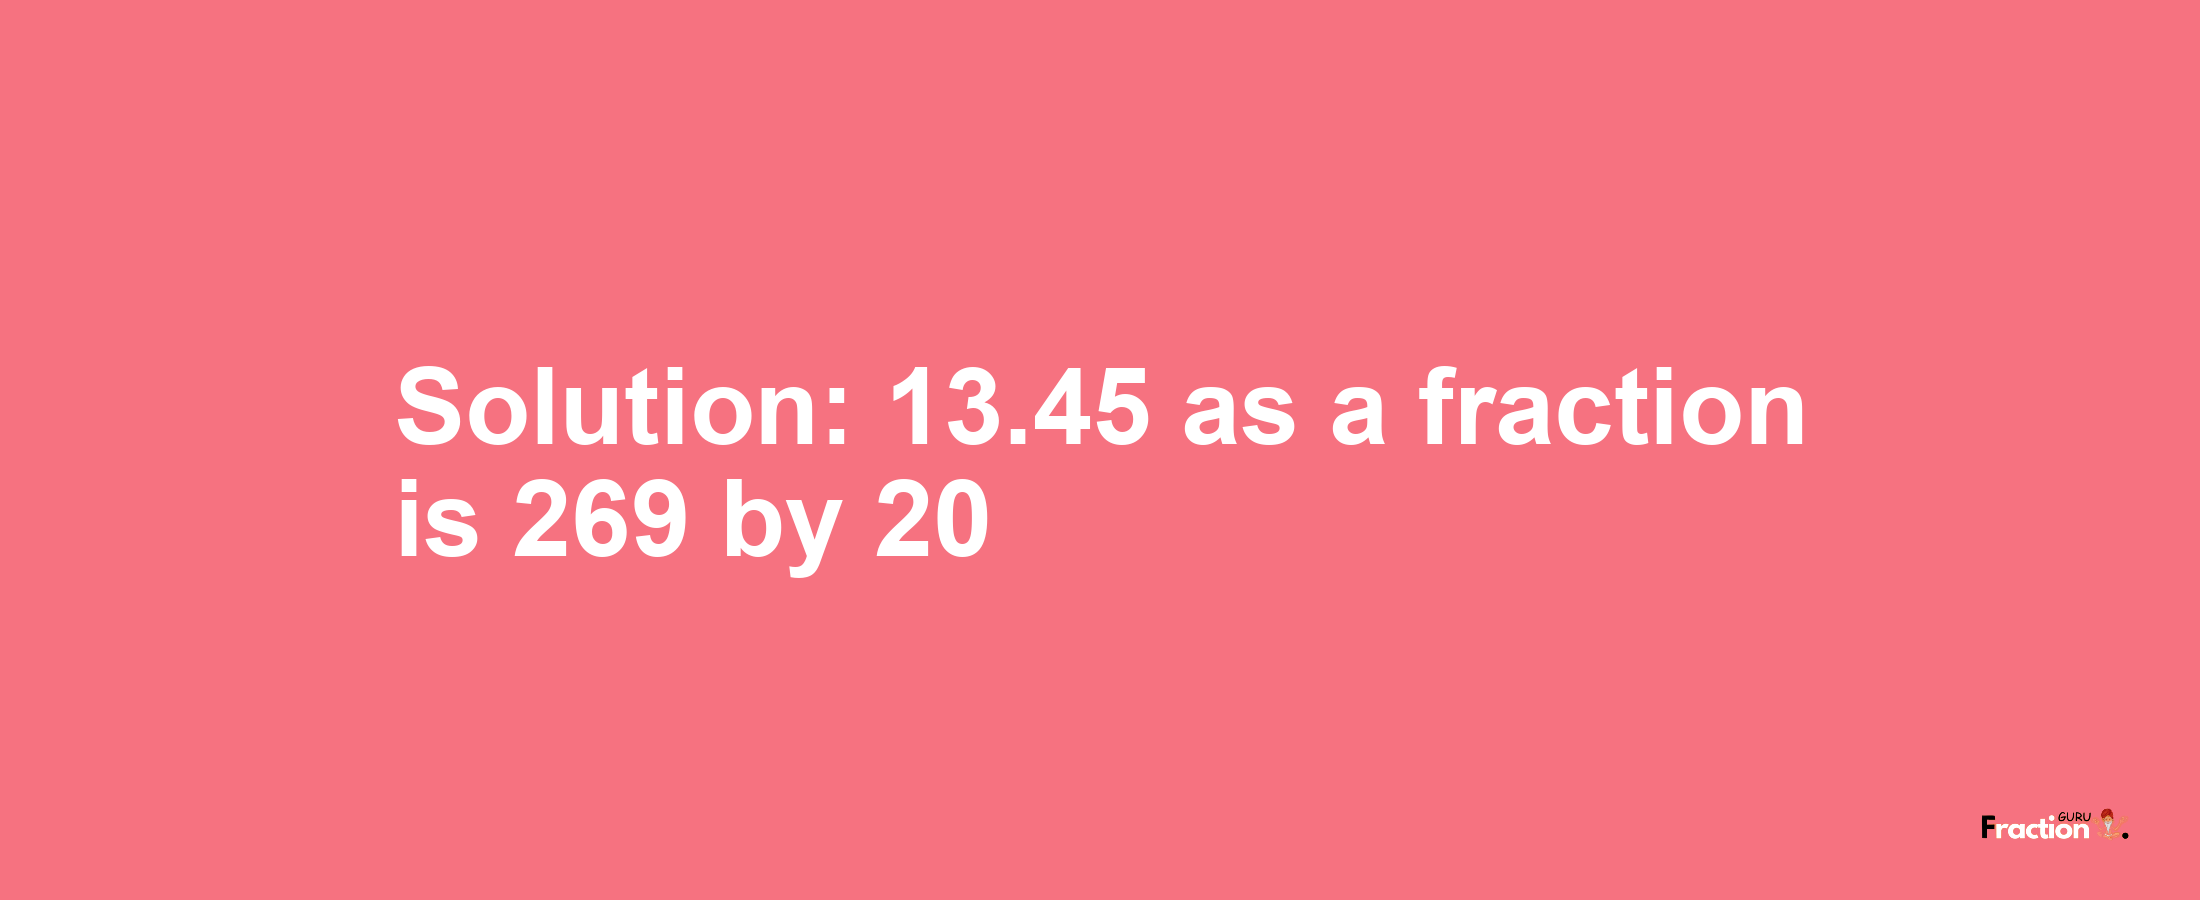 Solution:13.45 as a fraction is 269/20